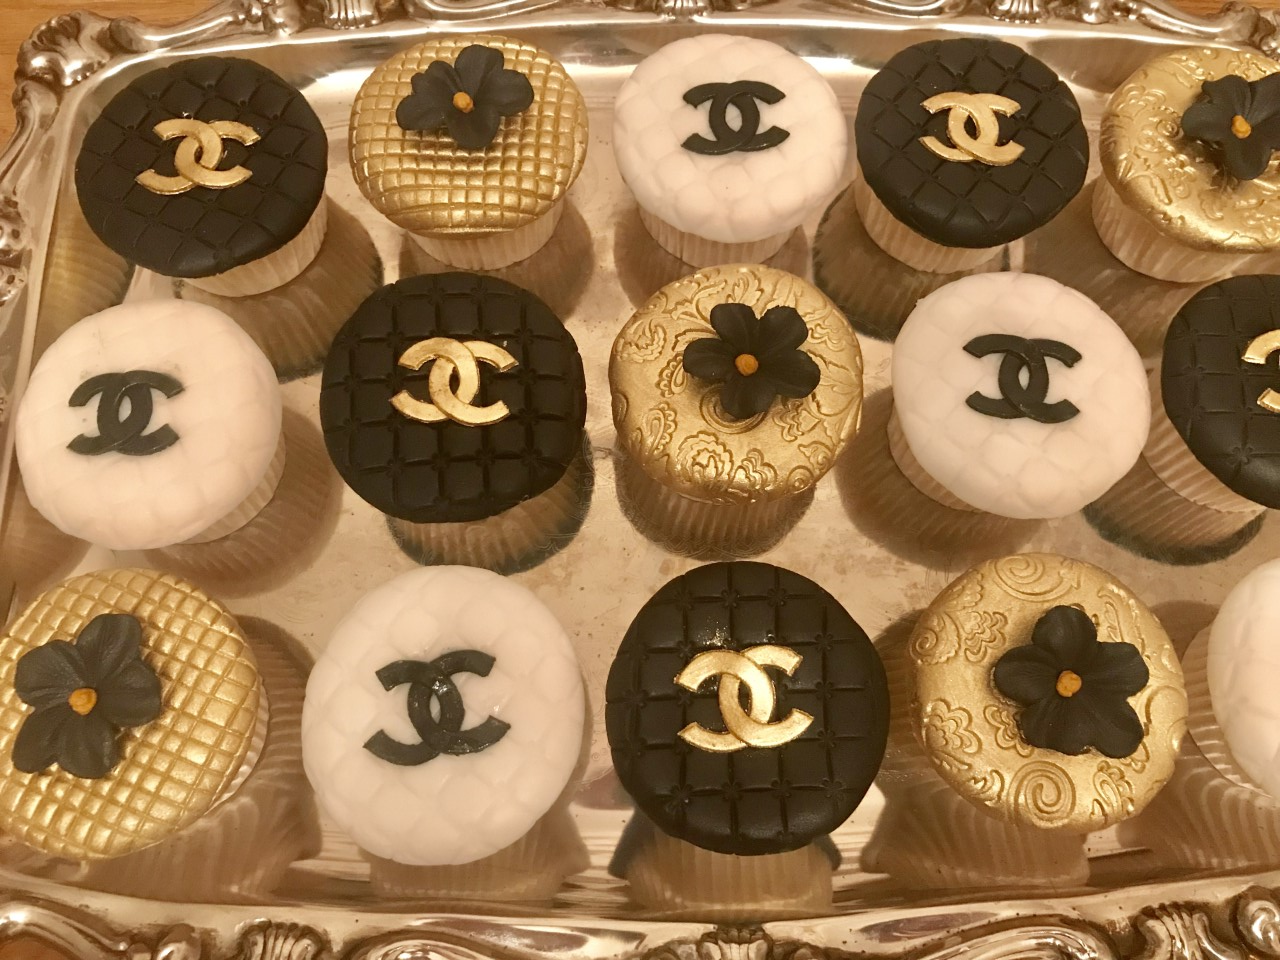 Chanel Cup Cakes – Ann's Designer Cakes